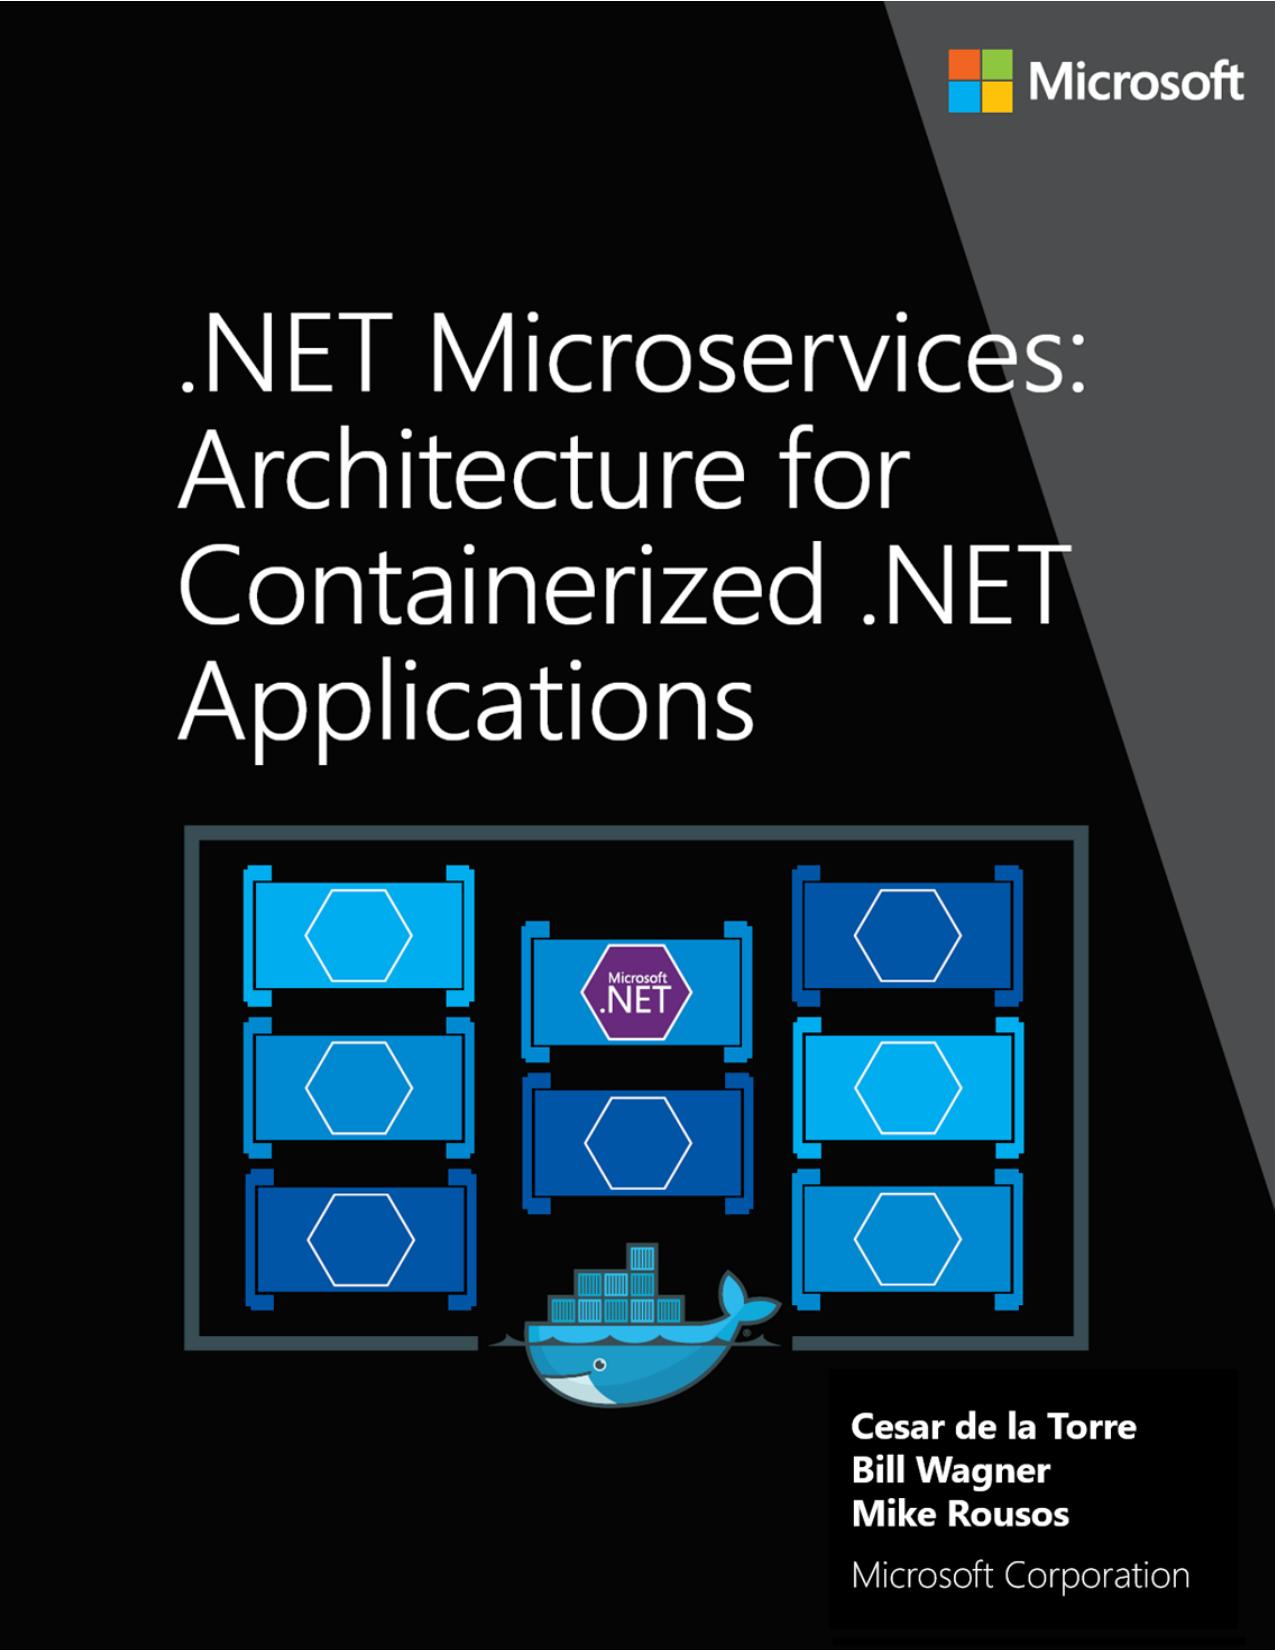 NET-Microservices-Architecture-for-Containerized-NET-Applications - Version 6